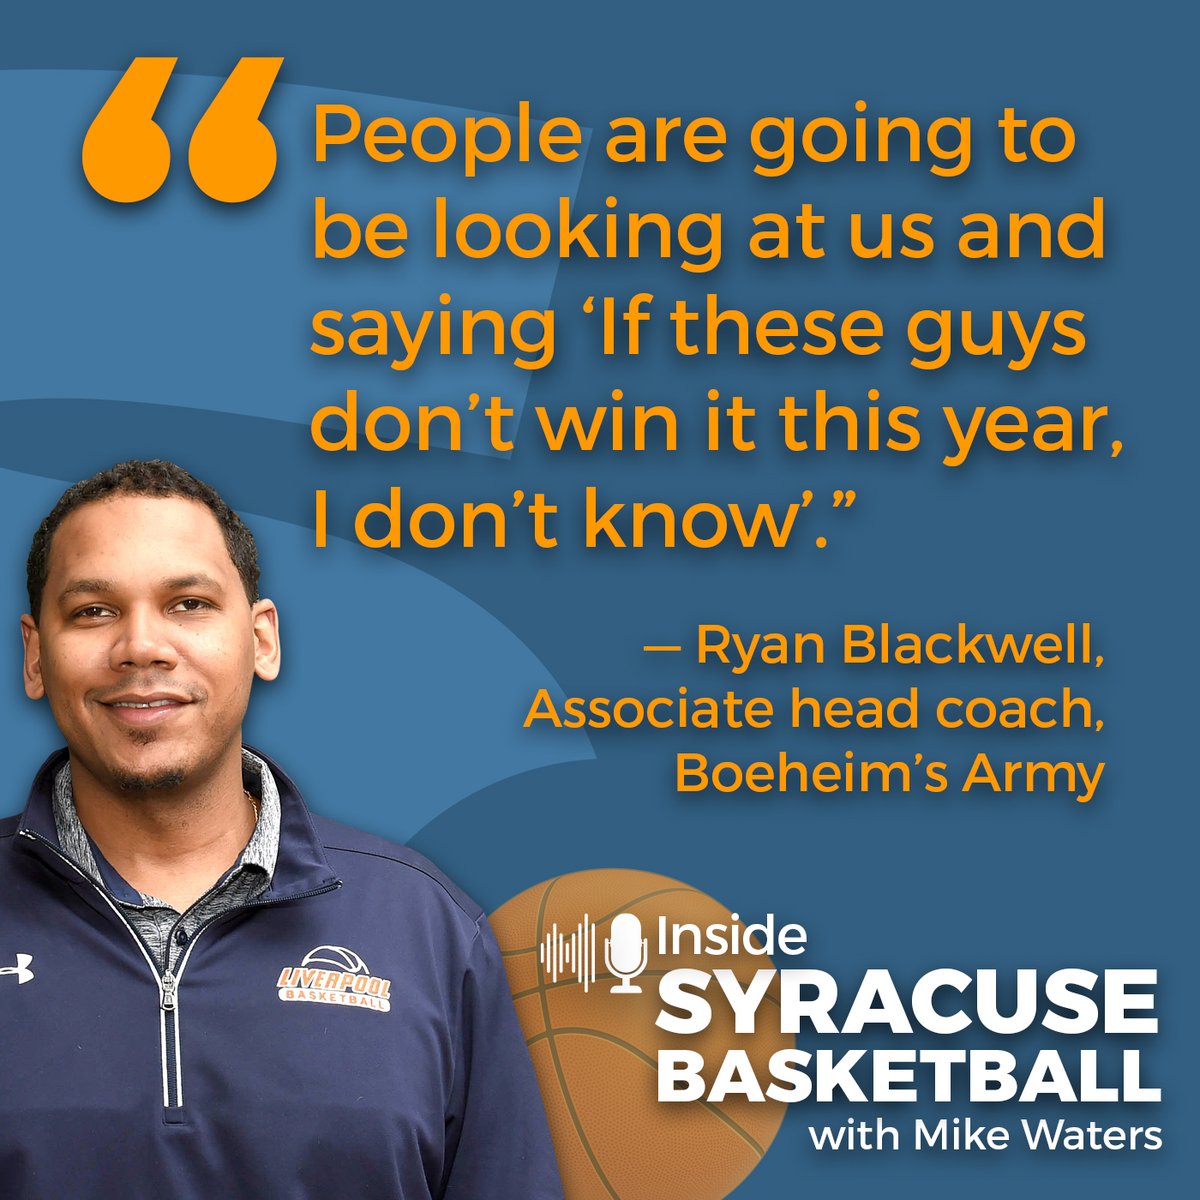 Ryan Blackwell, who has coached Boeheim’s Army for the past five years, joins Mike Waters on the Inside Syracuse Basketball podcast. Click the links to listen to the full episode and subscribe to the show. https://t.co/C4fM4uhkxE https://t.co/qrCAp0Sx4a https://t.co/QyXTDwvTXN